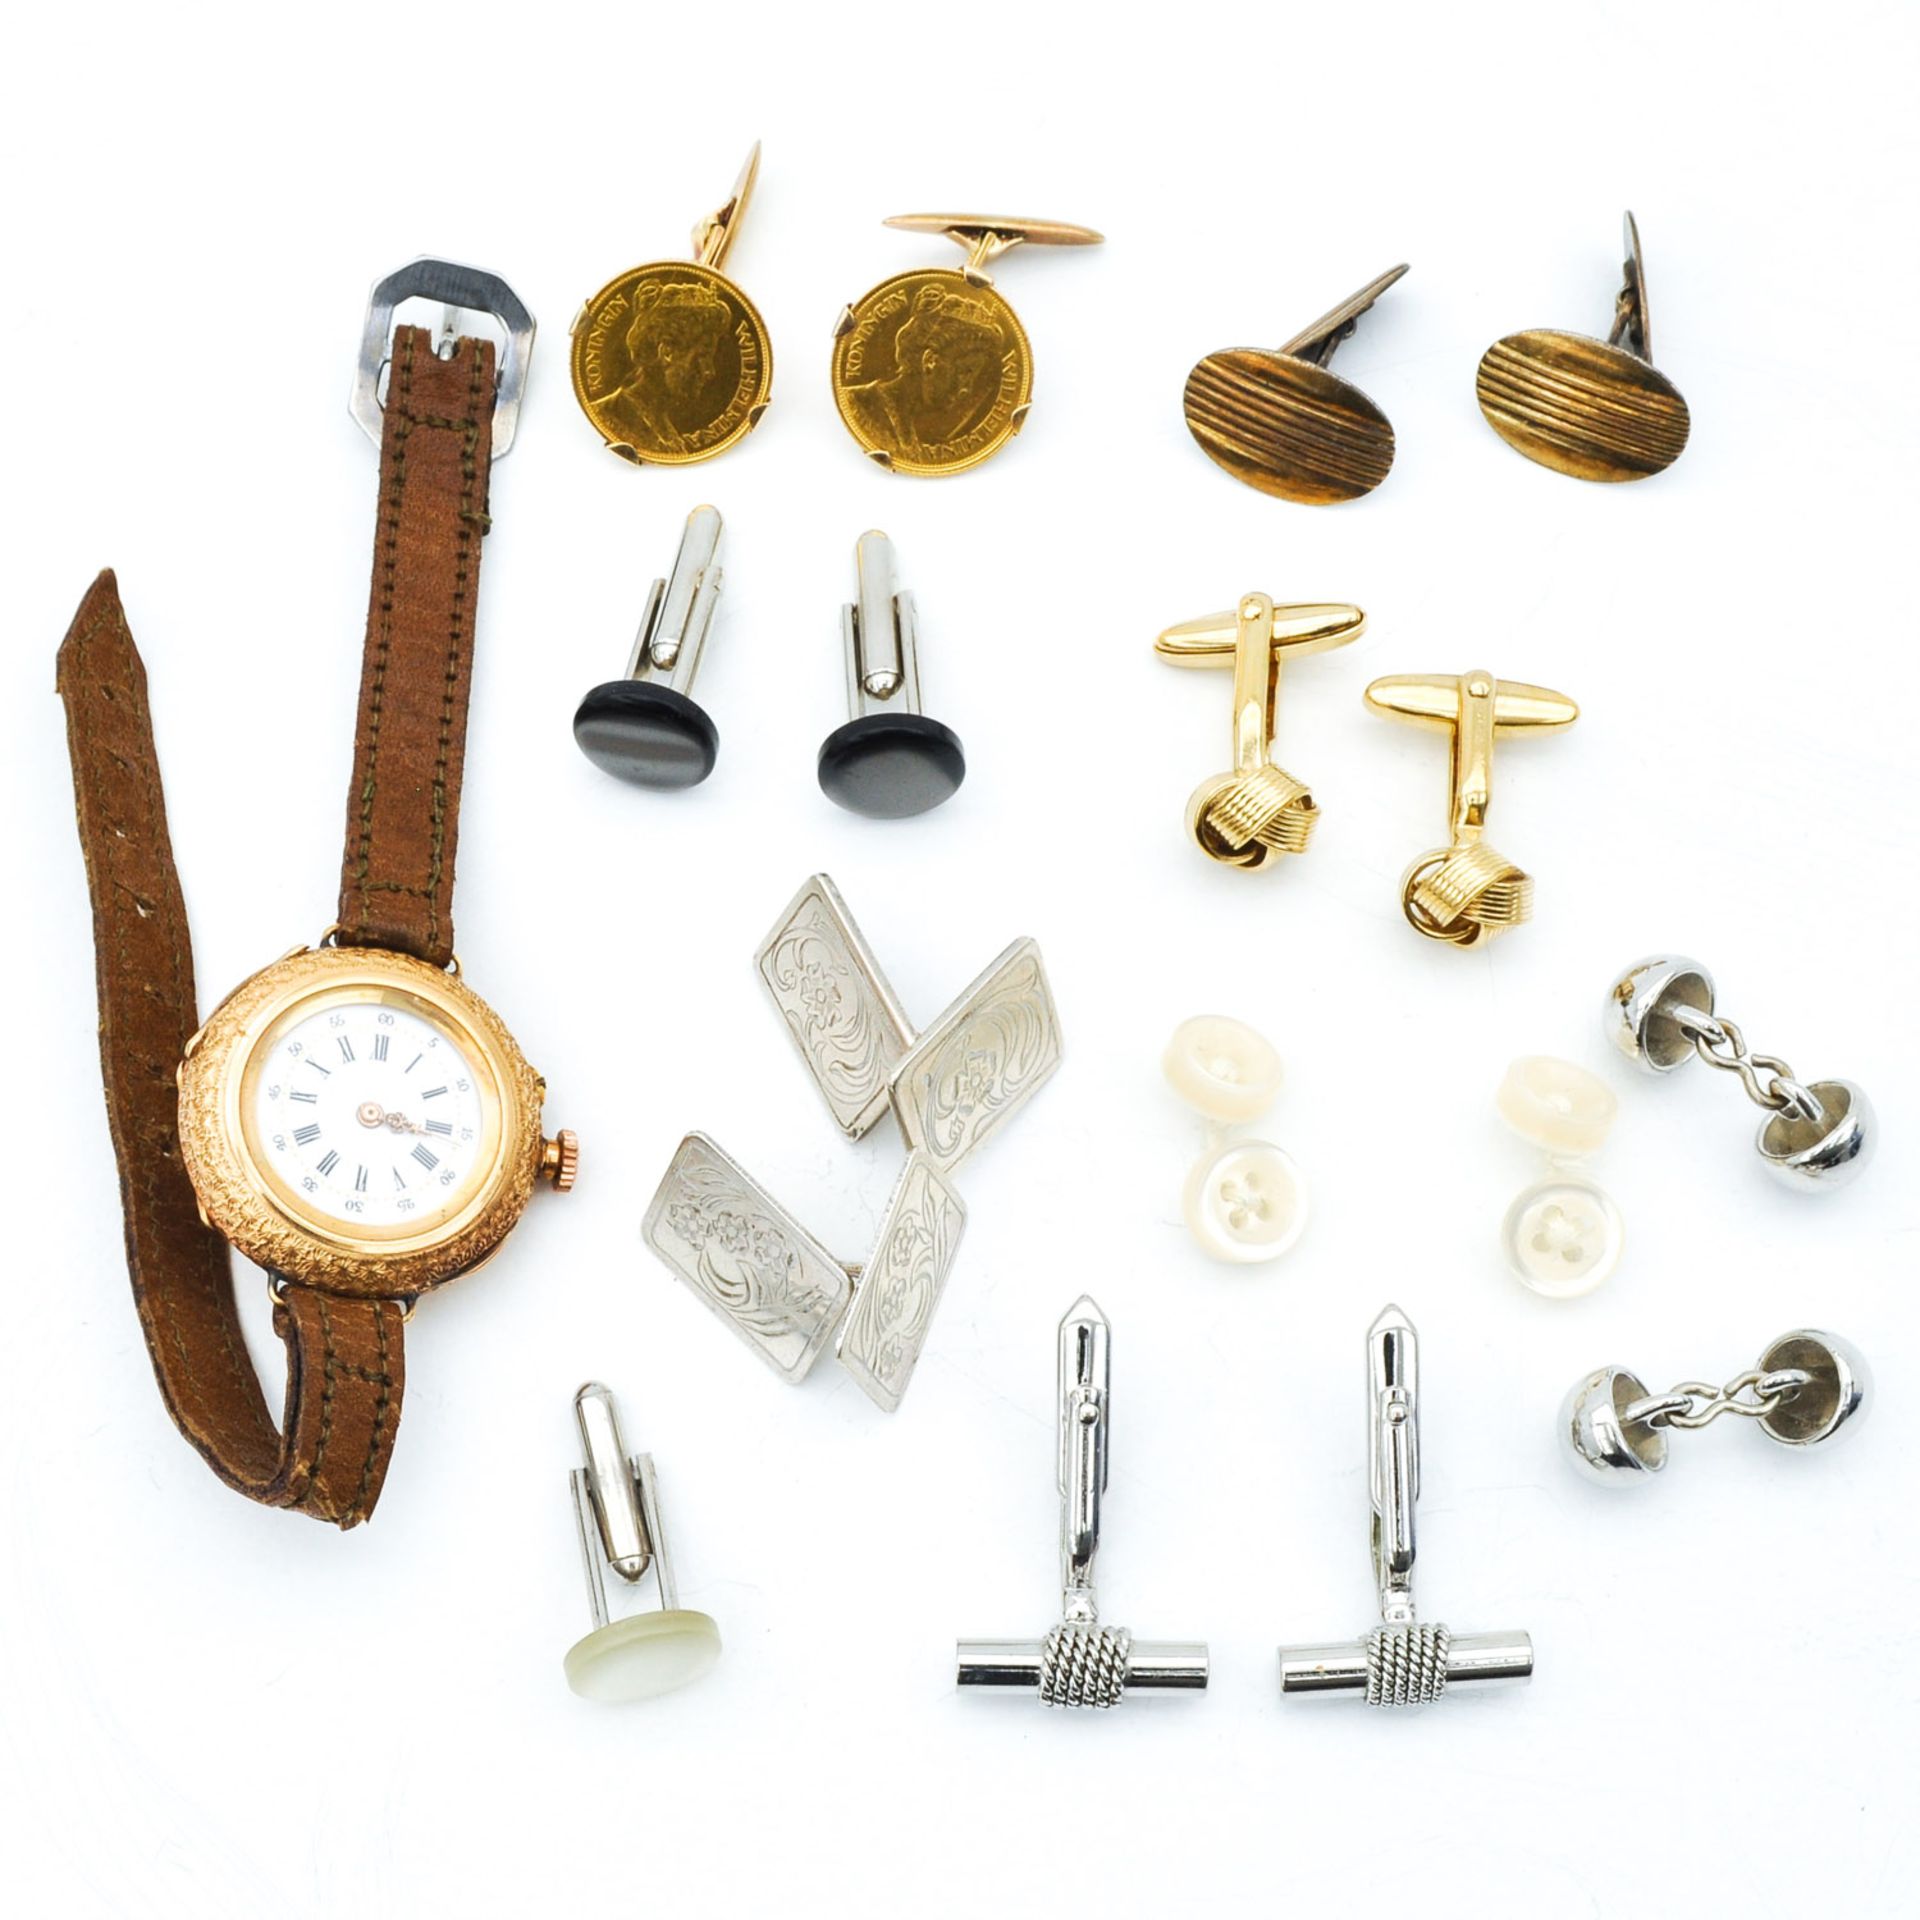 A Watch and Cuff Links